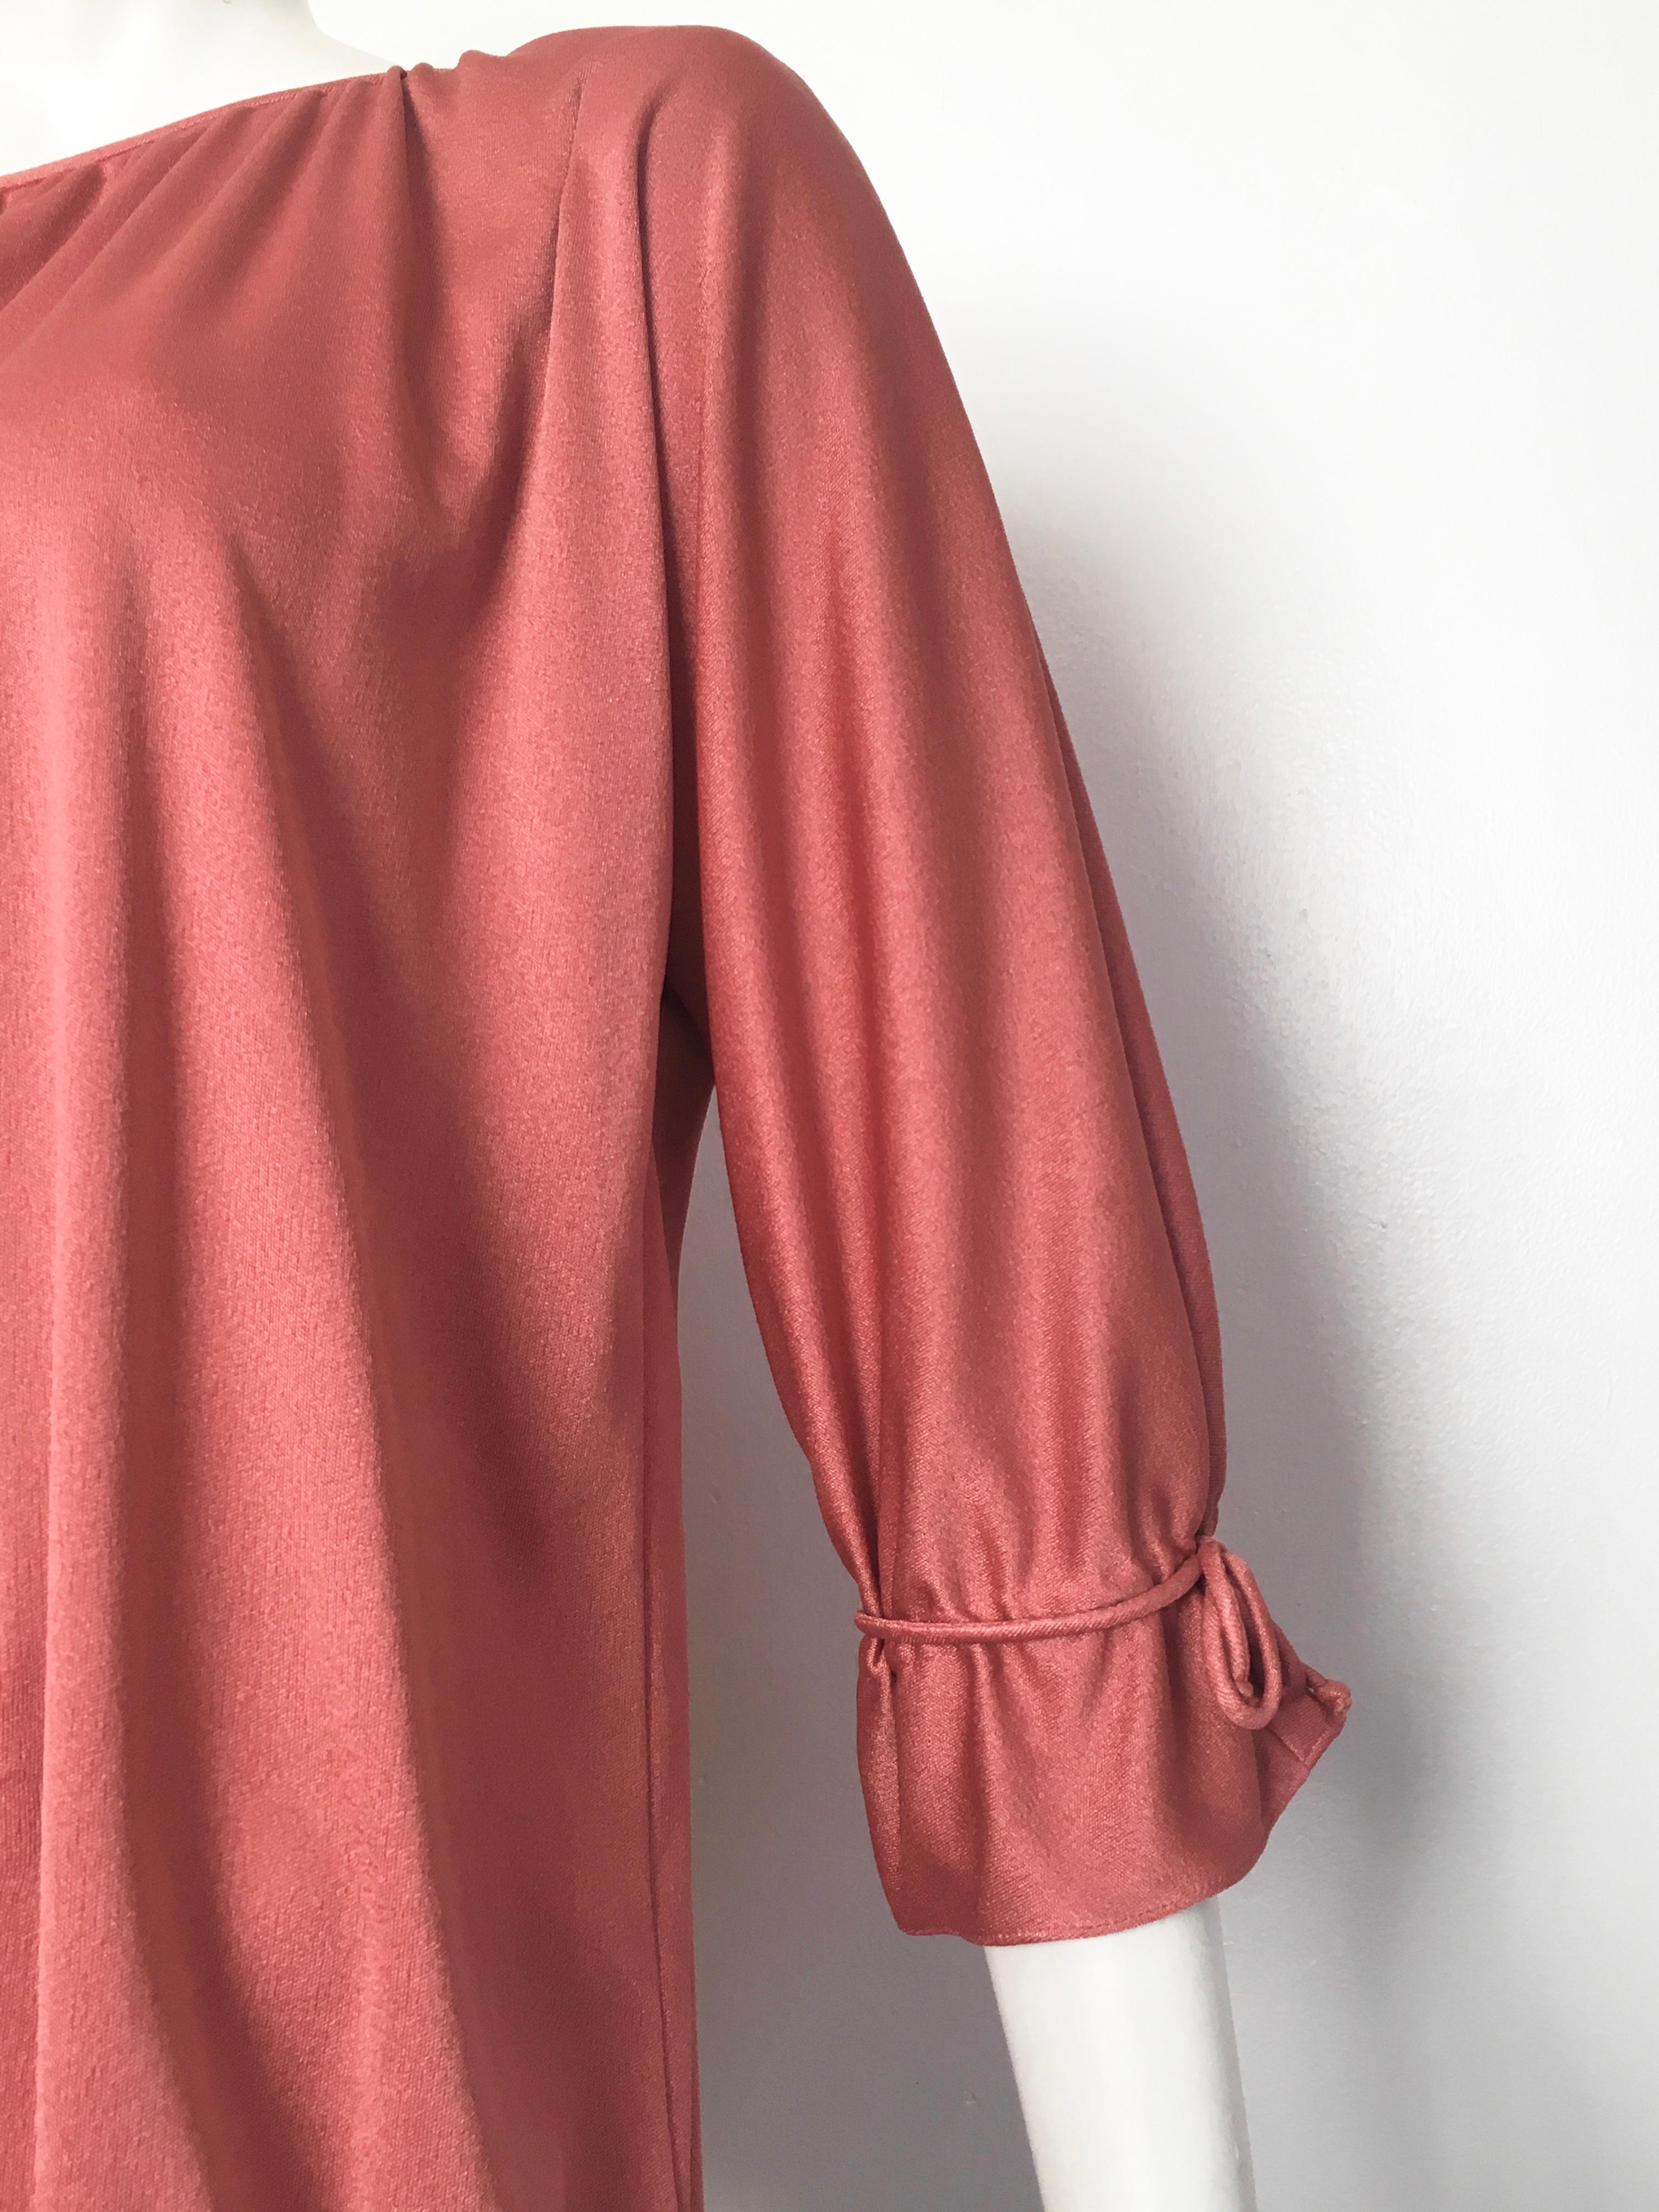 Pink Teal-Mignon by Teal Traina 1970s Rose Jersey Blouse Size Large. For Sale